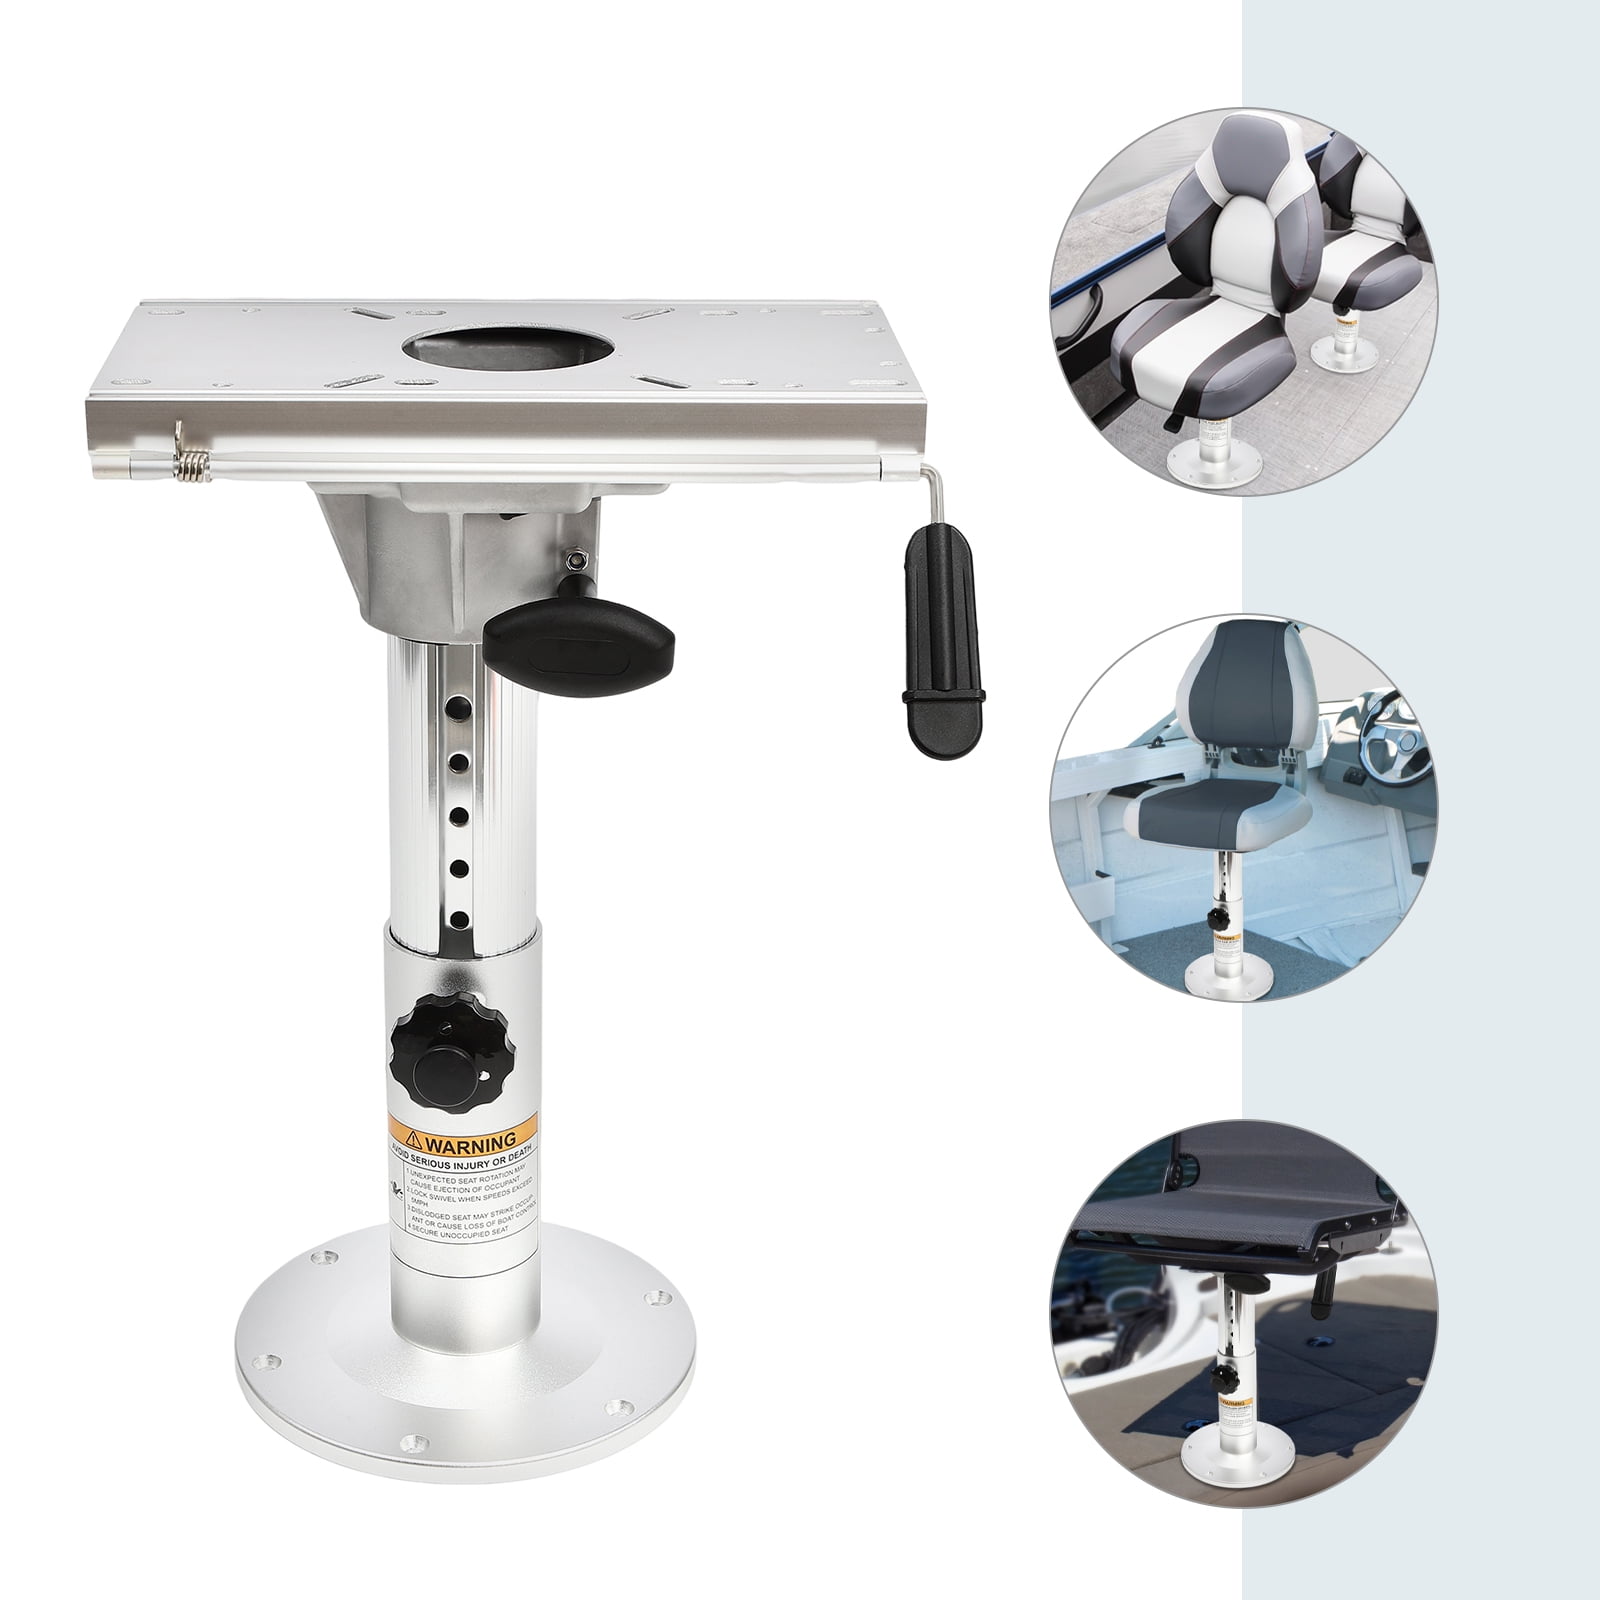 Adjustable Boat Seat Pedestal, Adjustable Height from 13 to 19,Bases Boat  Seat Pedestal Boat Chair Base for Yachts, Speedboats, Fishing Boats